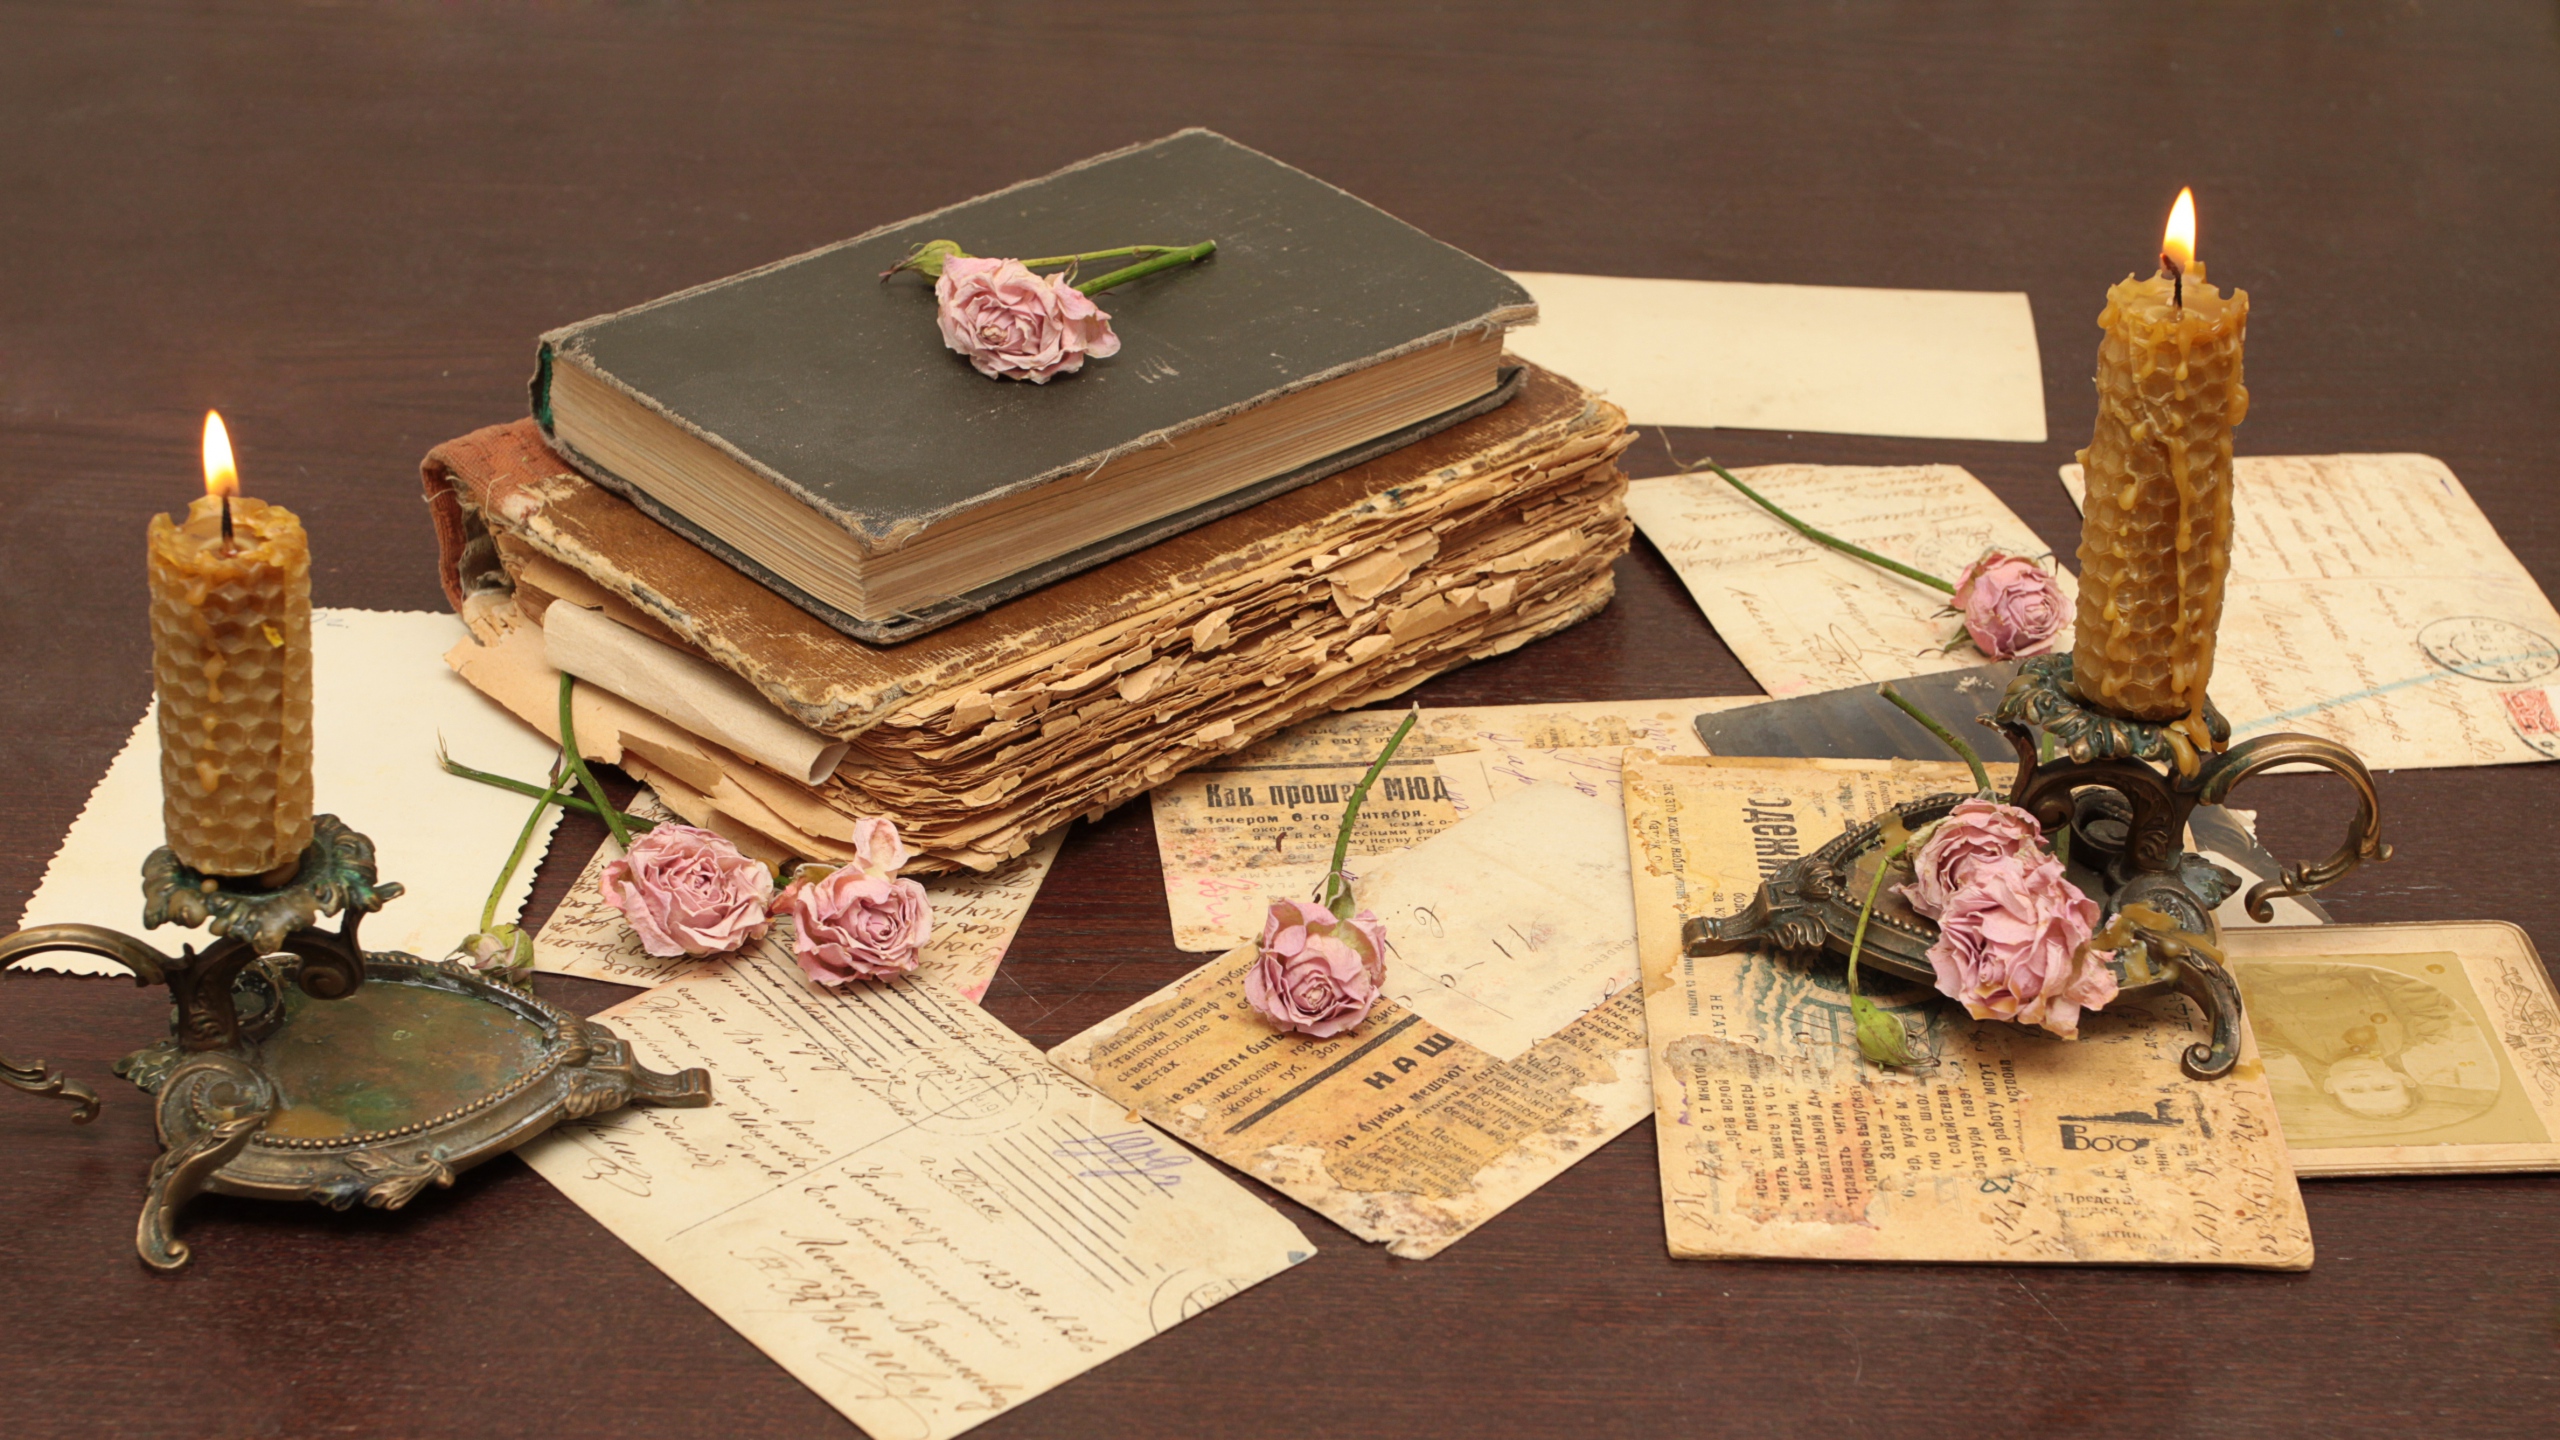 vintage_books_old_flowers_roses_candles_candle_holders_letters_cards_paper_table_74949_2560x1440